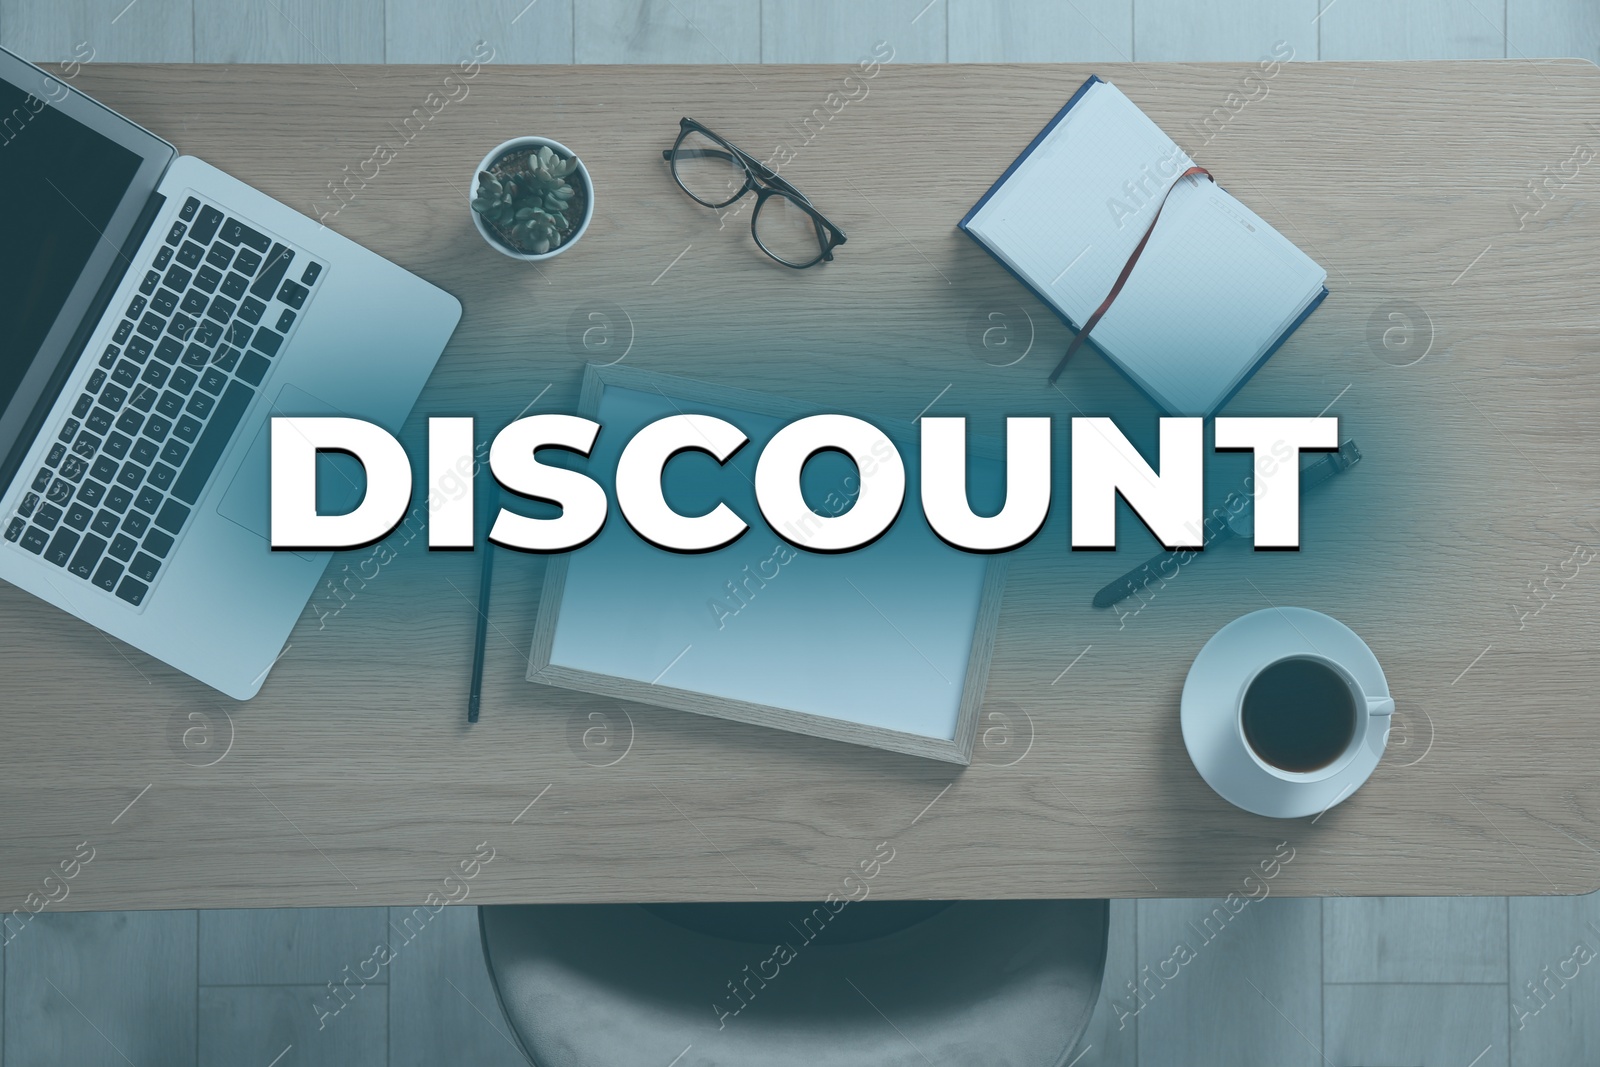 Image of Discount concept. Wooden table with laptop, cup of coffee and stationery indoors, top view